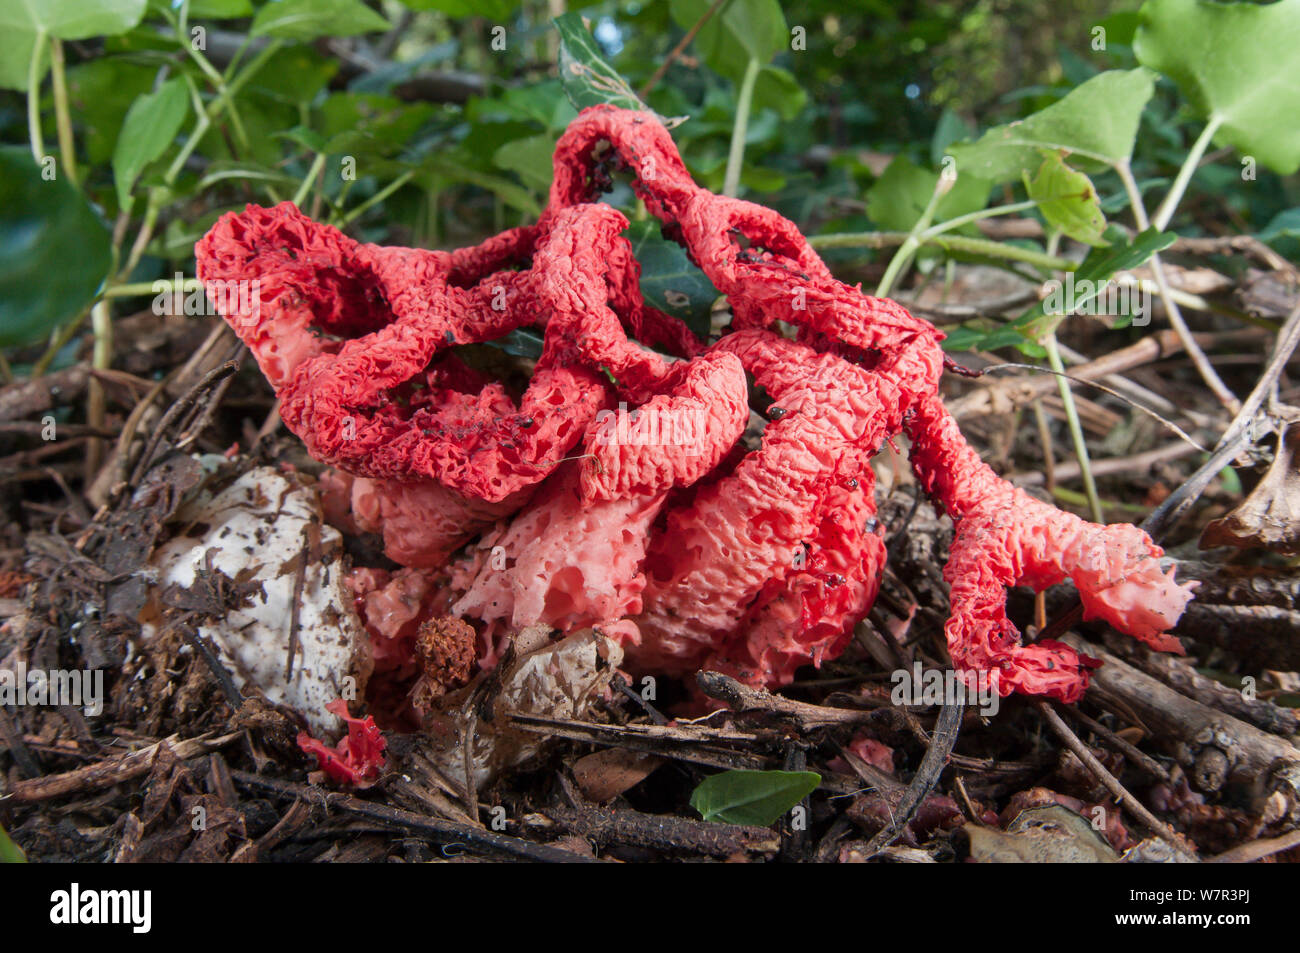 Basket Stinkhorn (Clathrus ruber) a fungus of which resembles and smells of rotten flesh attarcting flies in large numbers to disperse spores, near Castel Giorgio, Orvieto, Umbria, Italy, September Stock Photo